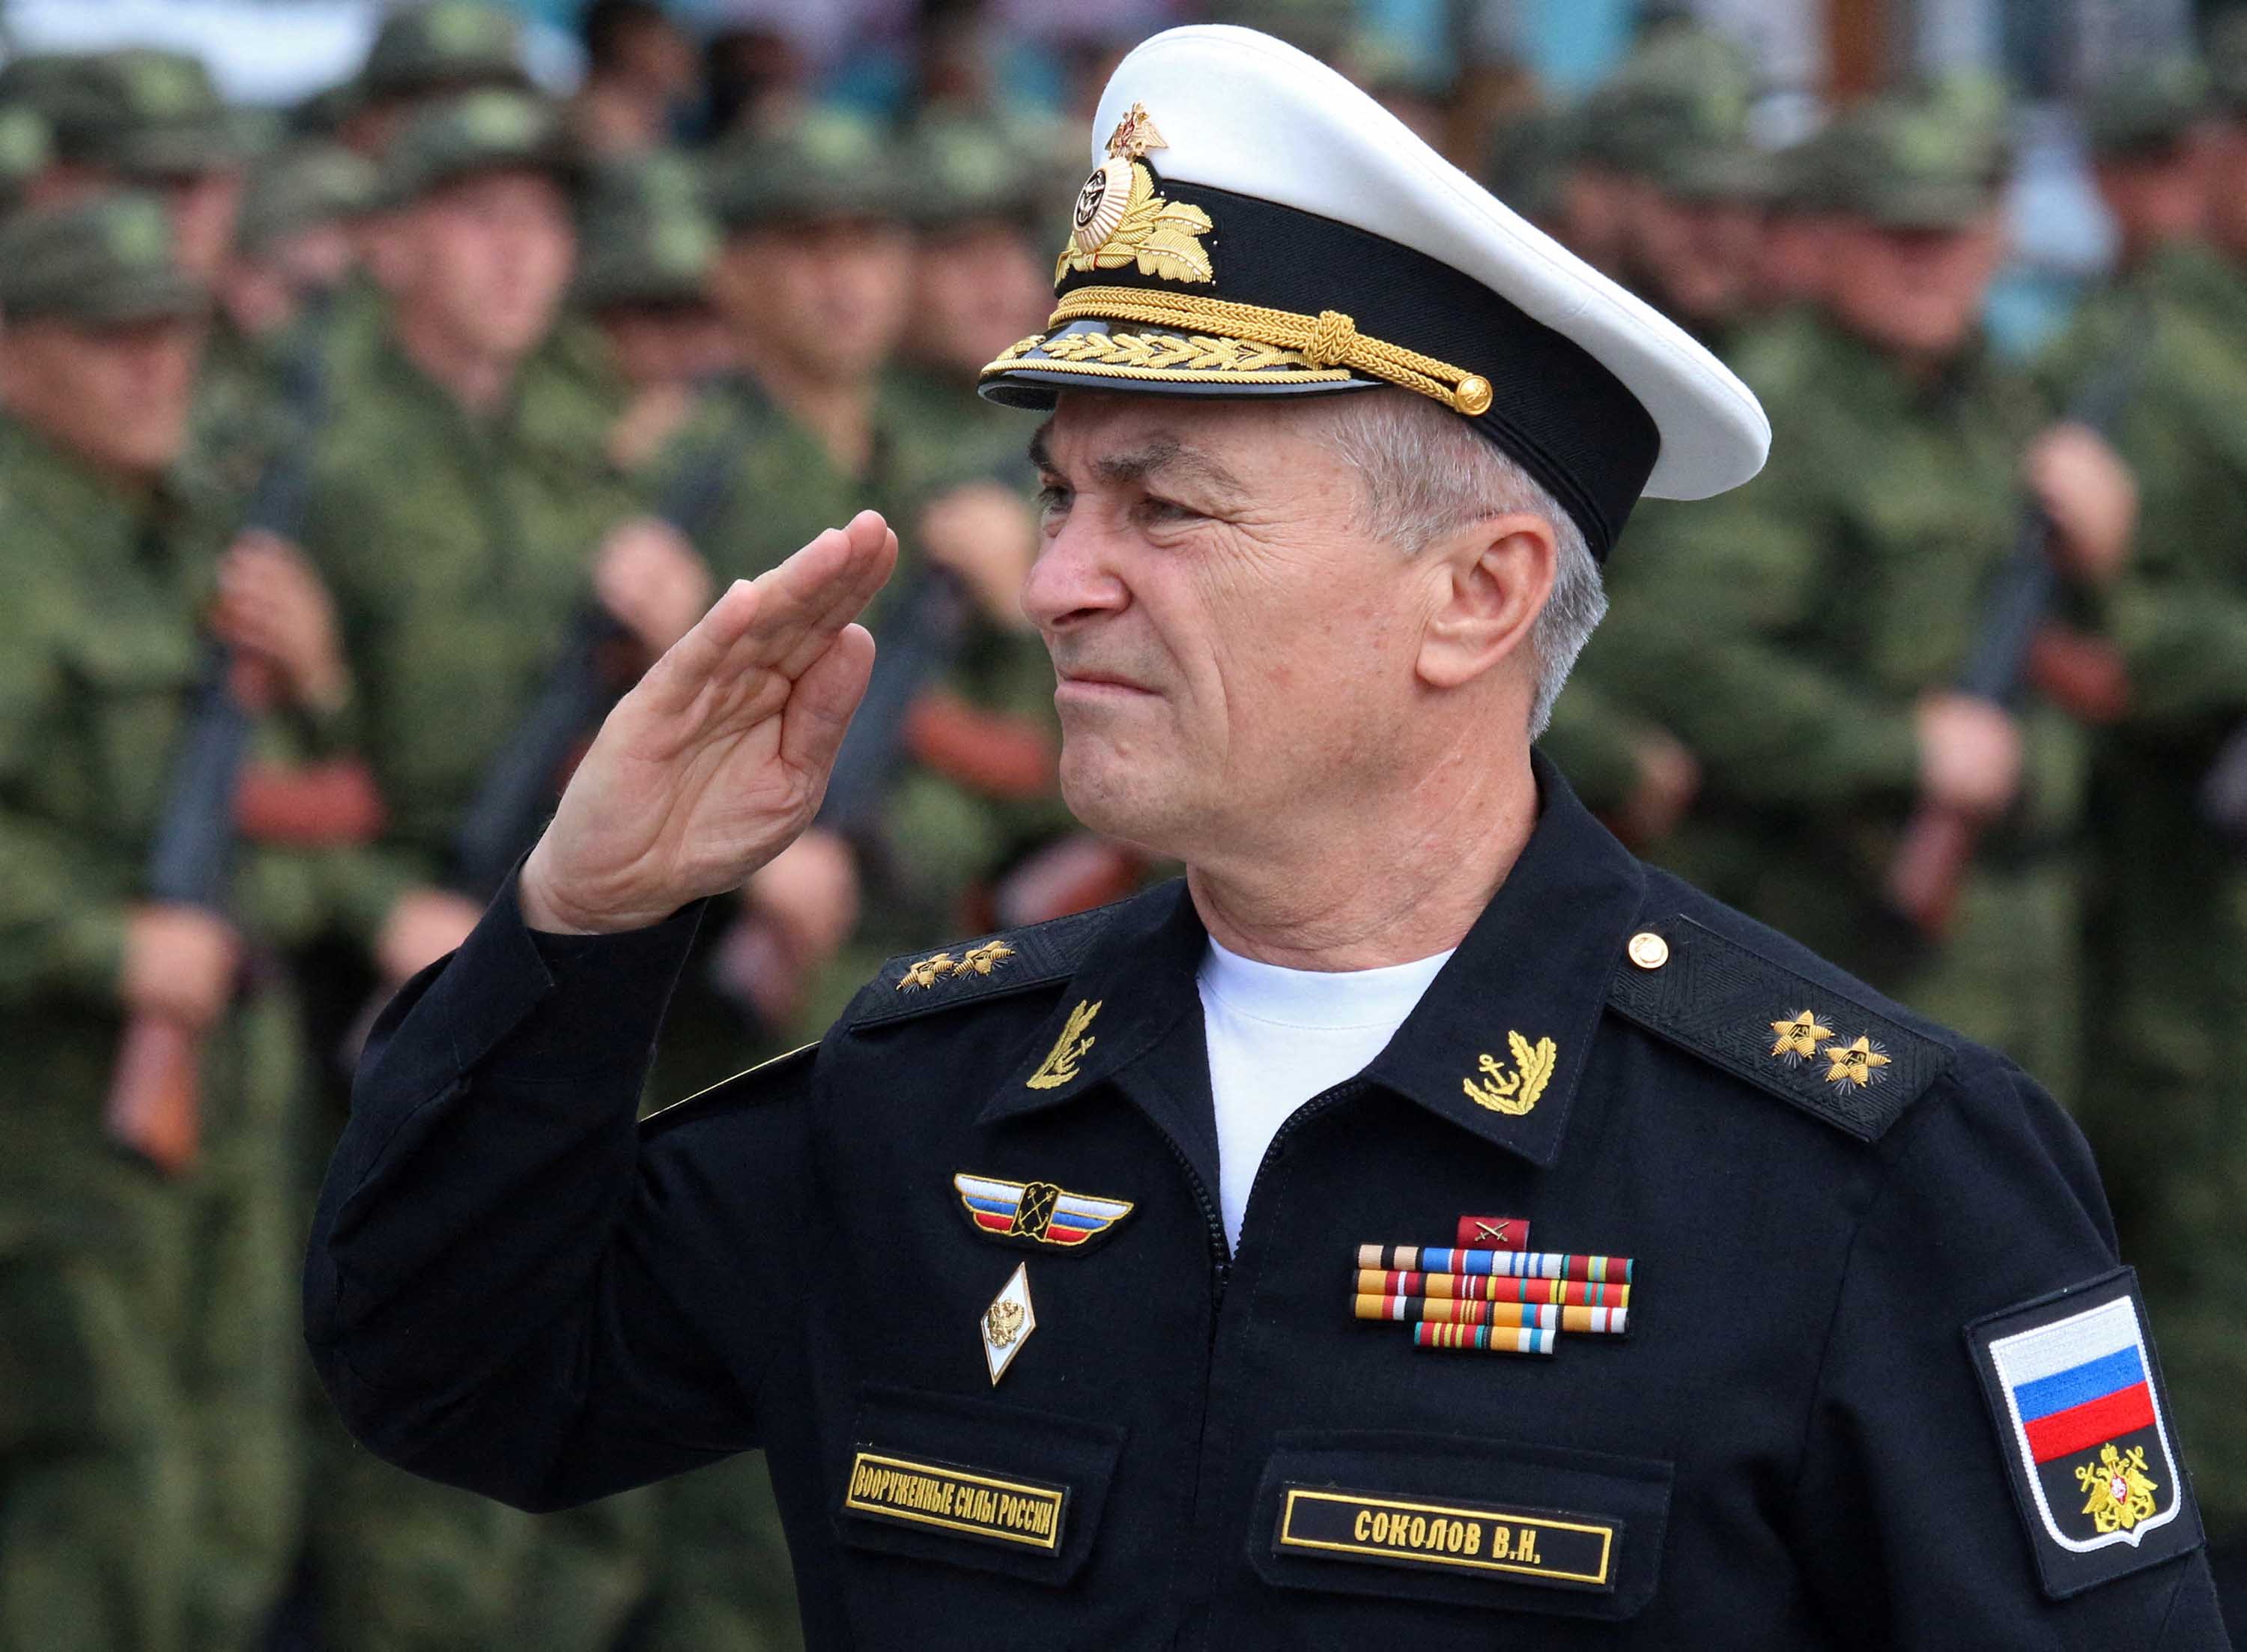 Commander of the Russian Black Sea Fleet Vice-Admiral Viktor Sokolov salutes during a send-off ceremony for reservists, in Sevastopol, Crimea, in September 2022.